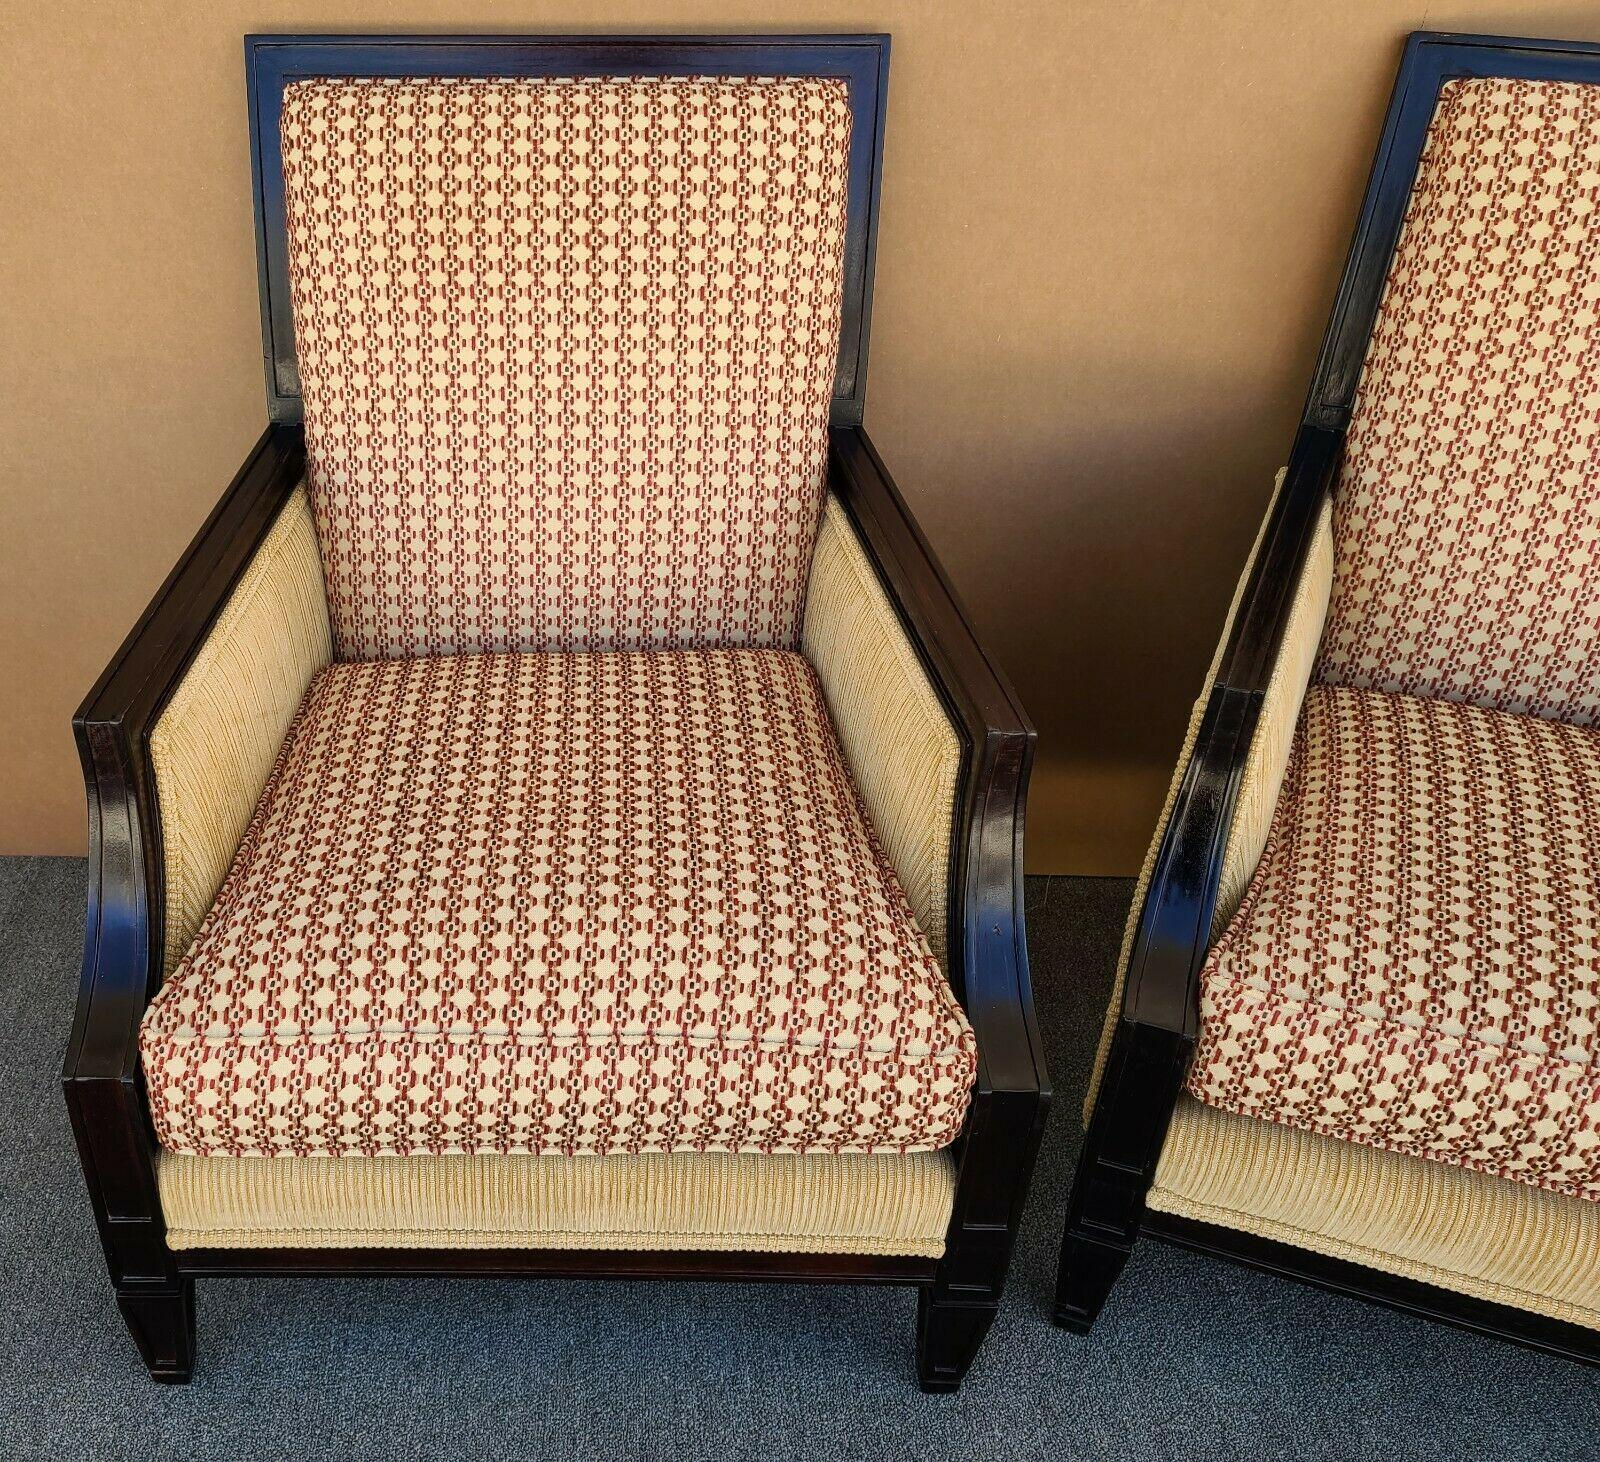 taylor king chairs